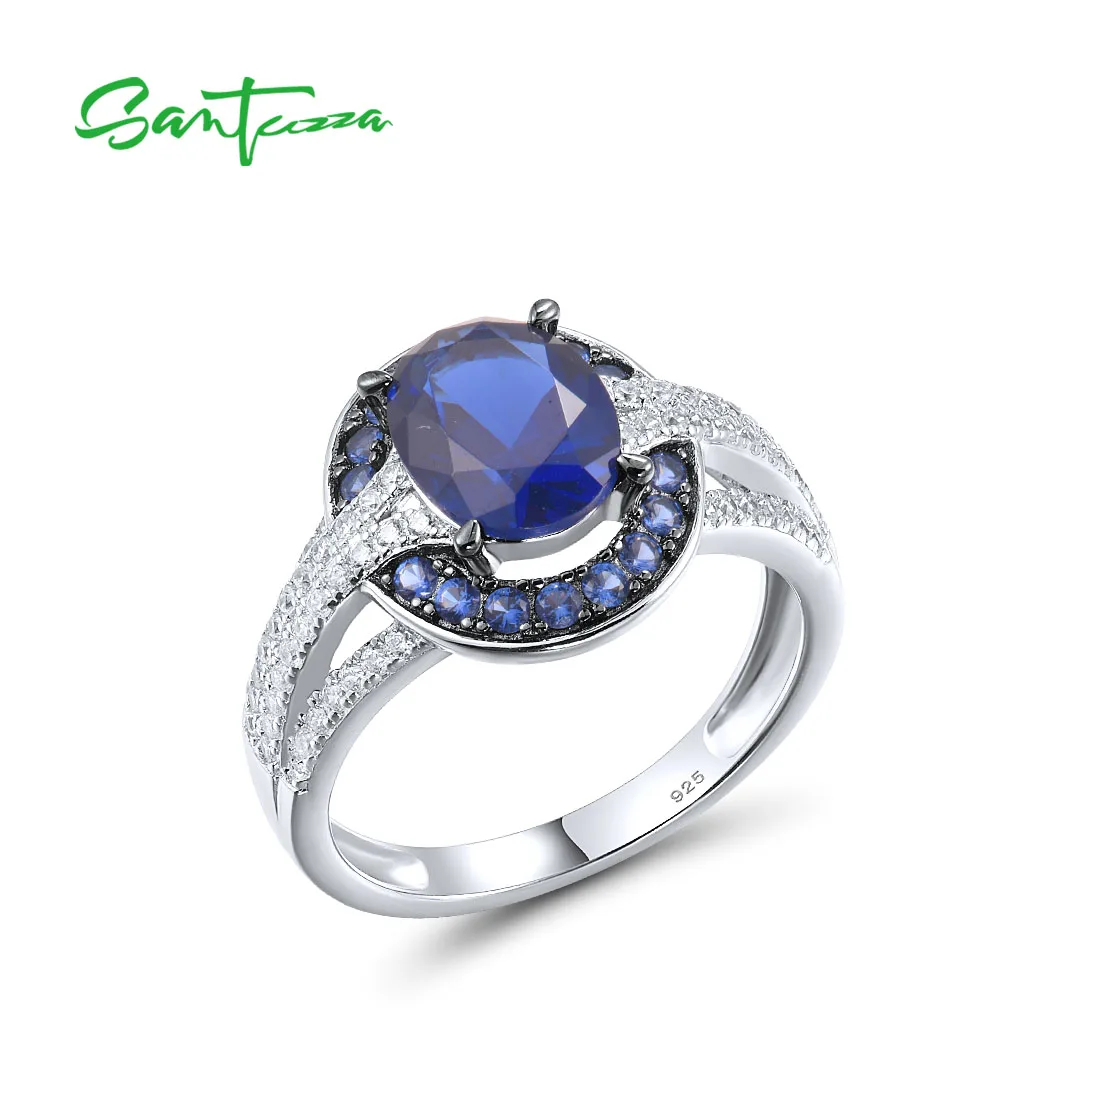 

SANTUZZA Silver Rings For Women 925 Sterling Silver Sparkling Blue Stones White CZ Solitaire Ring Gorgeous Trendy Fine Jewelry